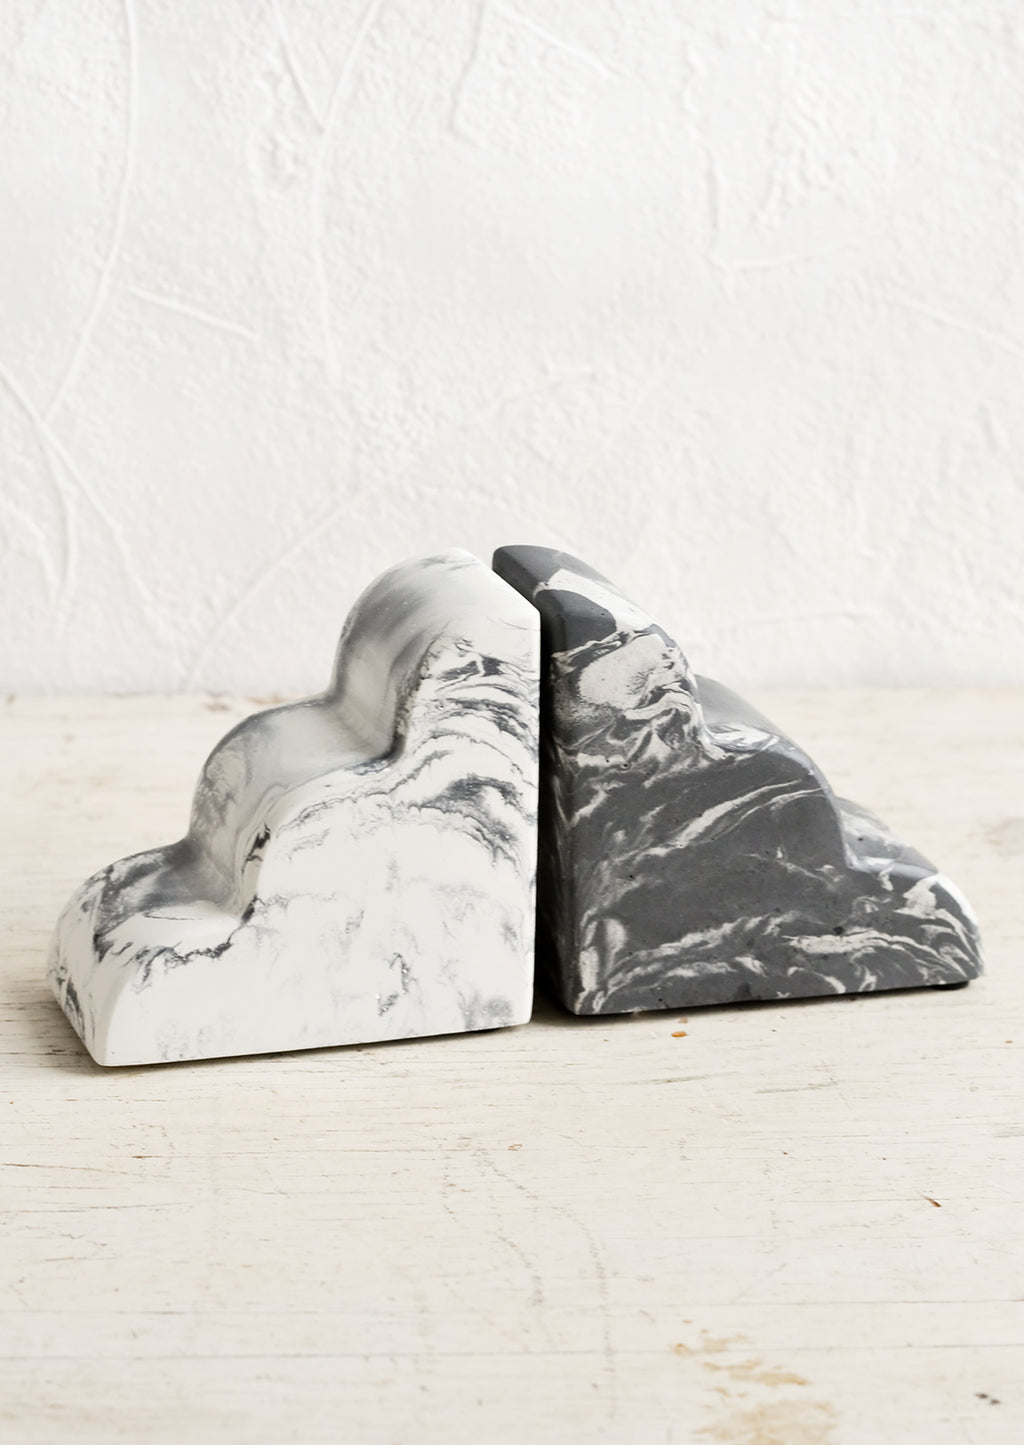 2: A pair of bookends in half-cloud shape in mis-matched, black and white marbleized pattern.